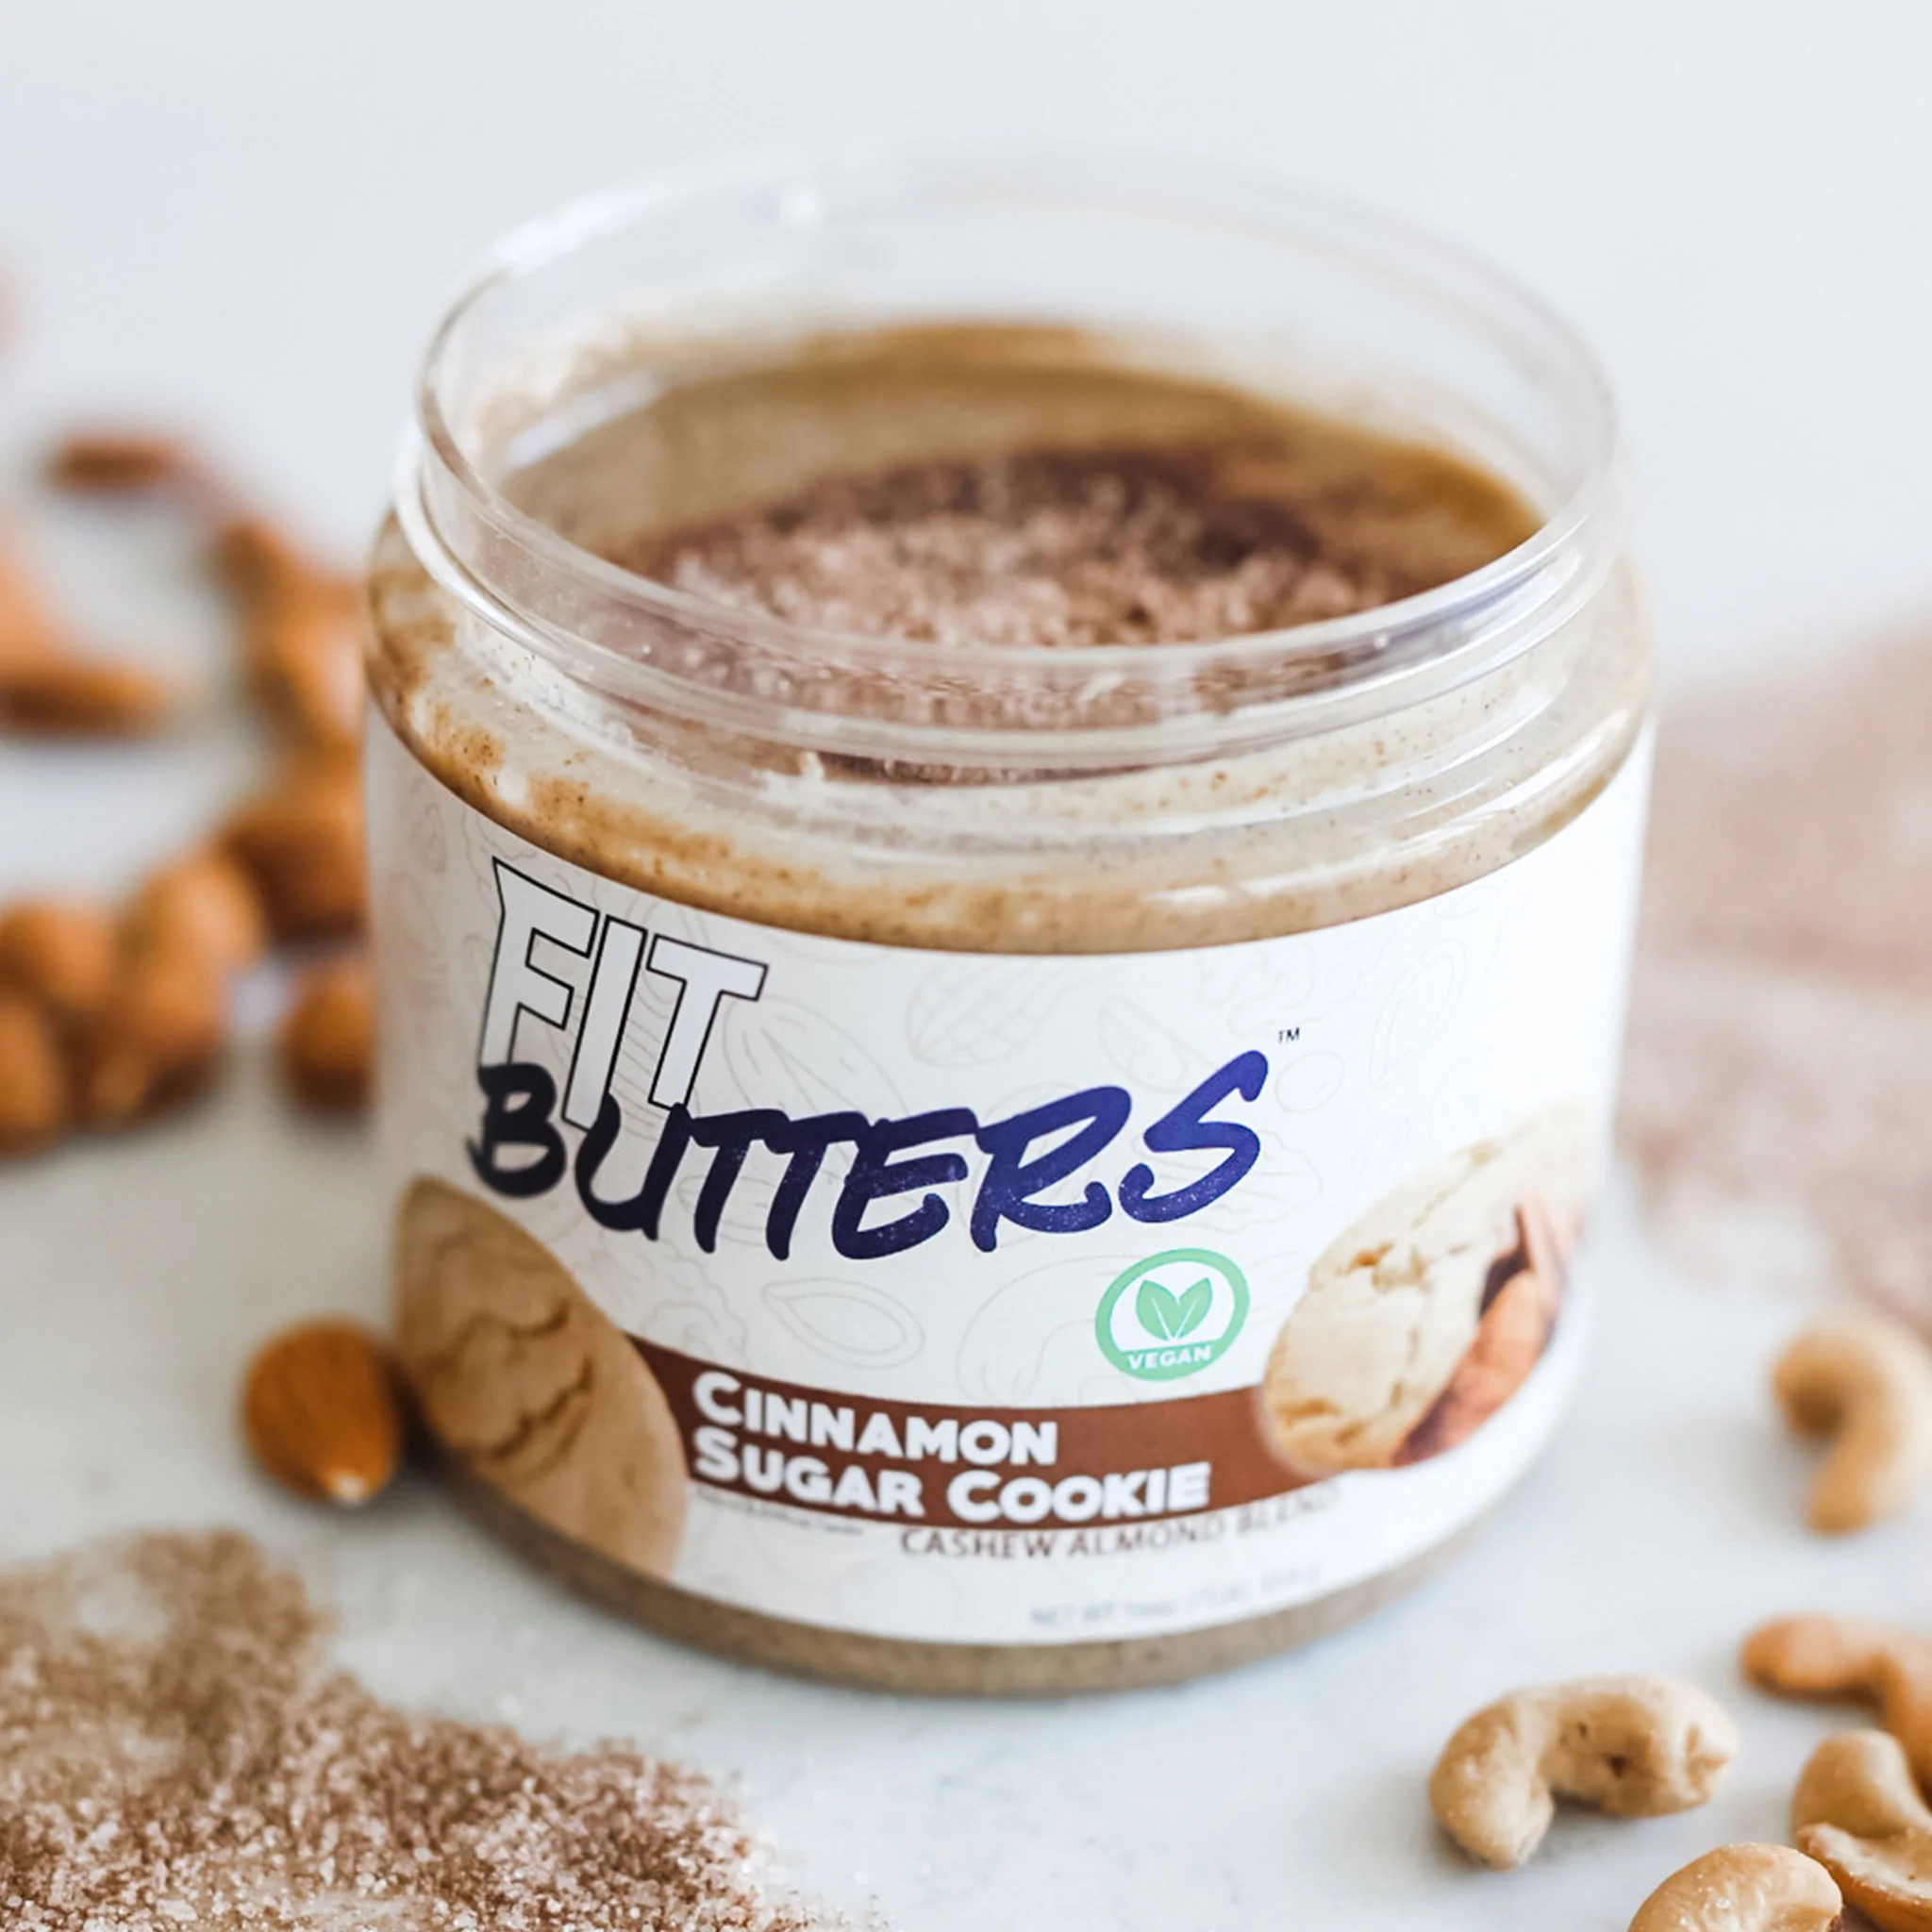 FIt Butters Cinnamon Sugar Cookie Cashew Almond Butter Image